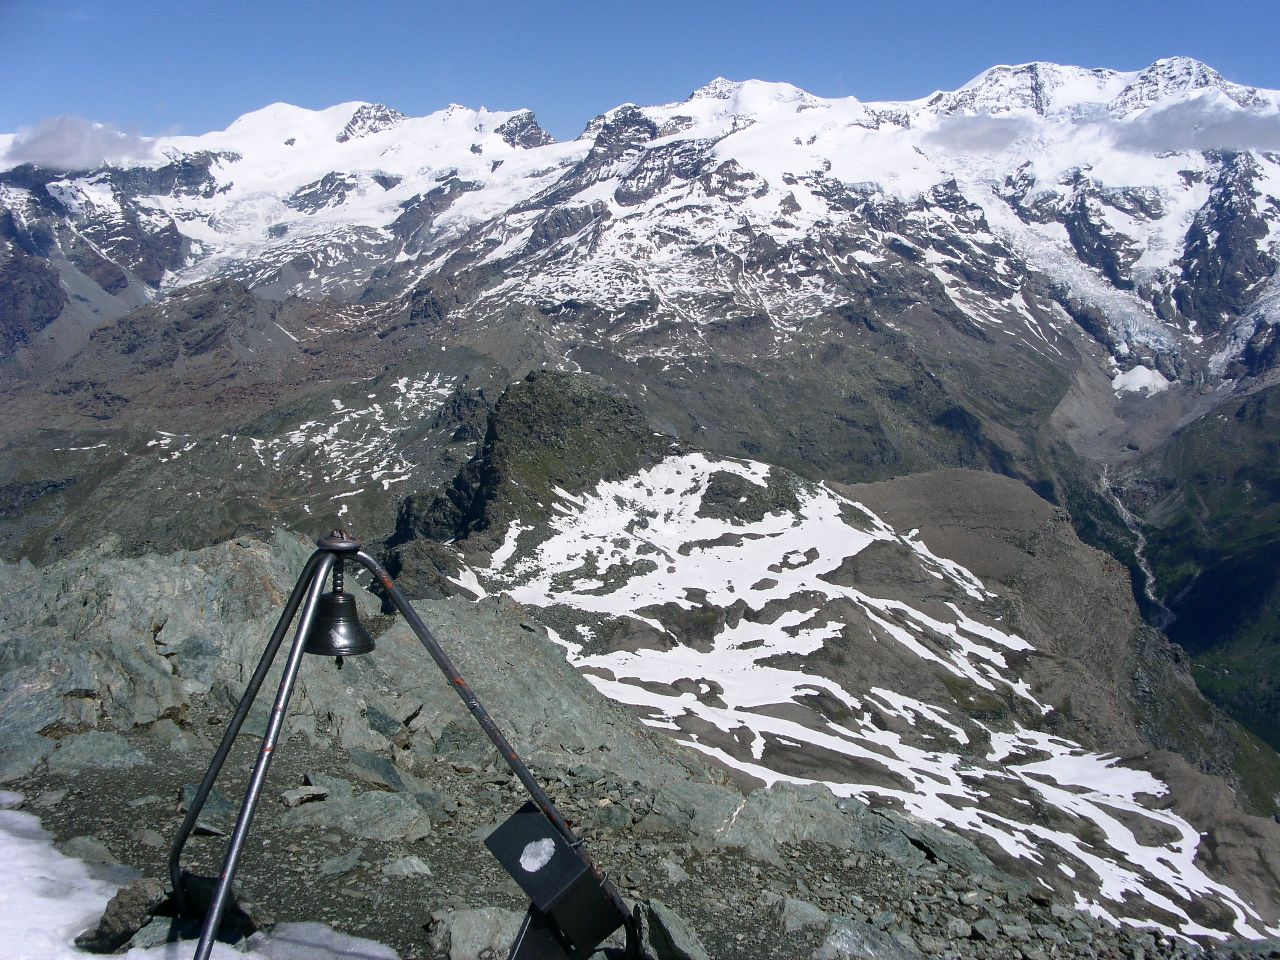 Monte Rosa glaciers seen from the top